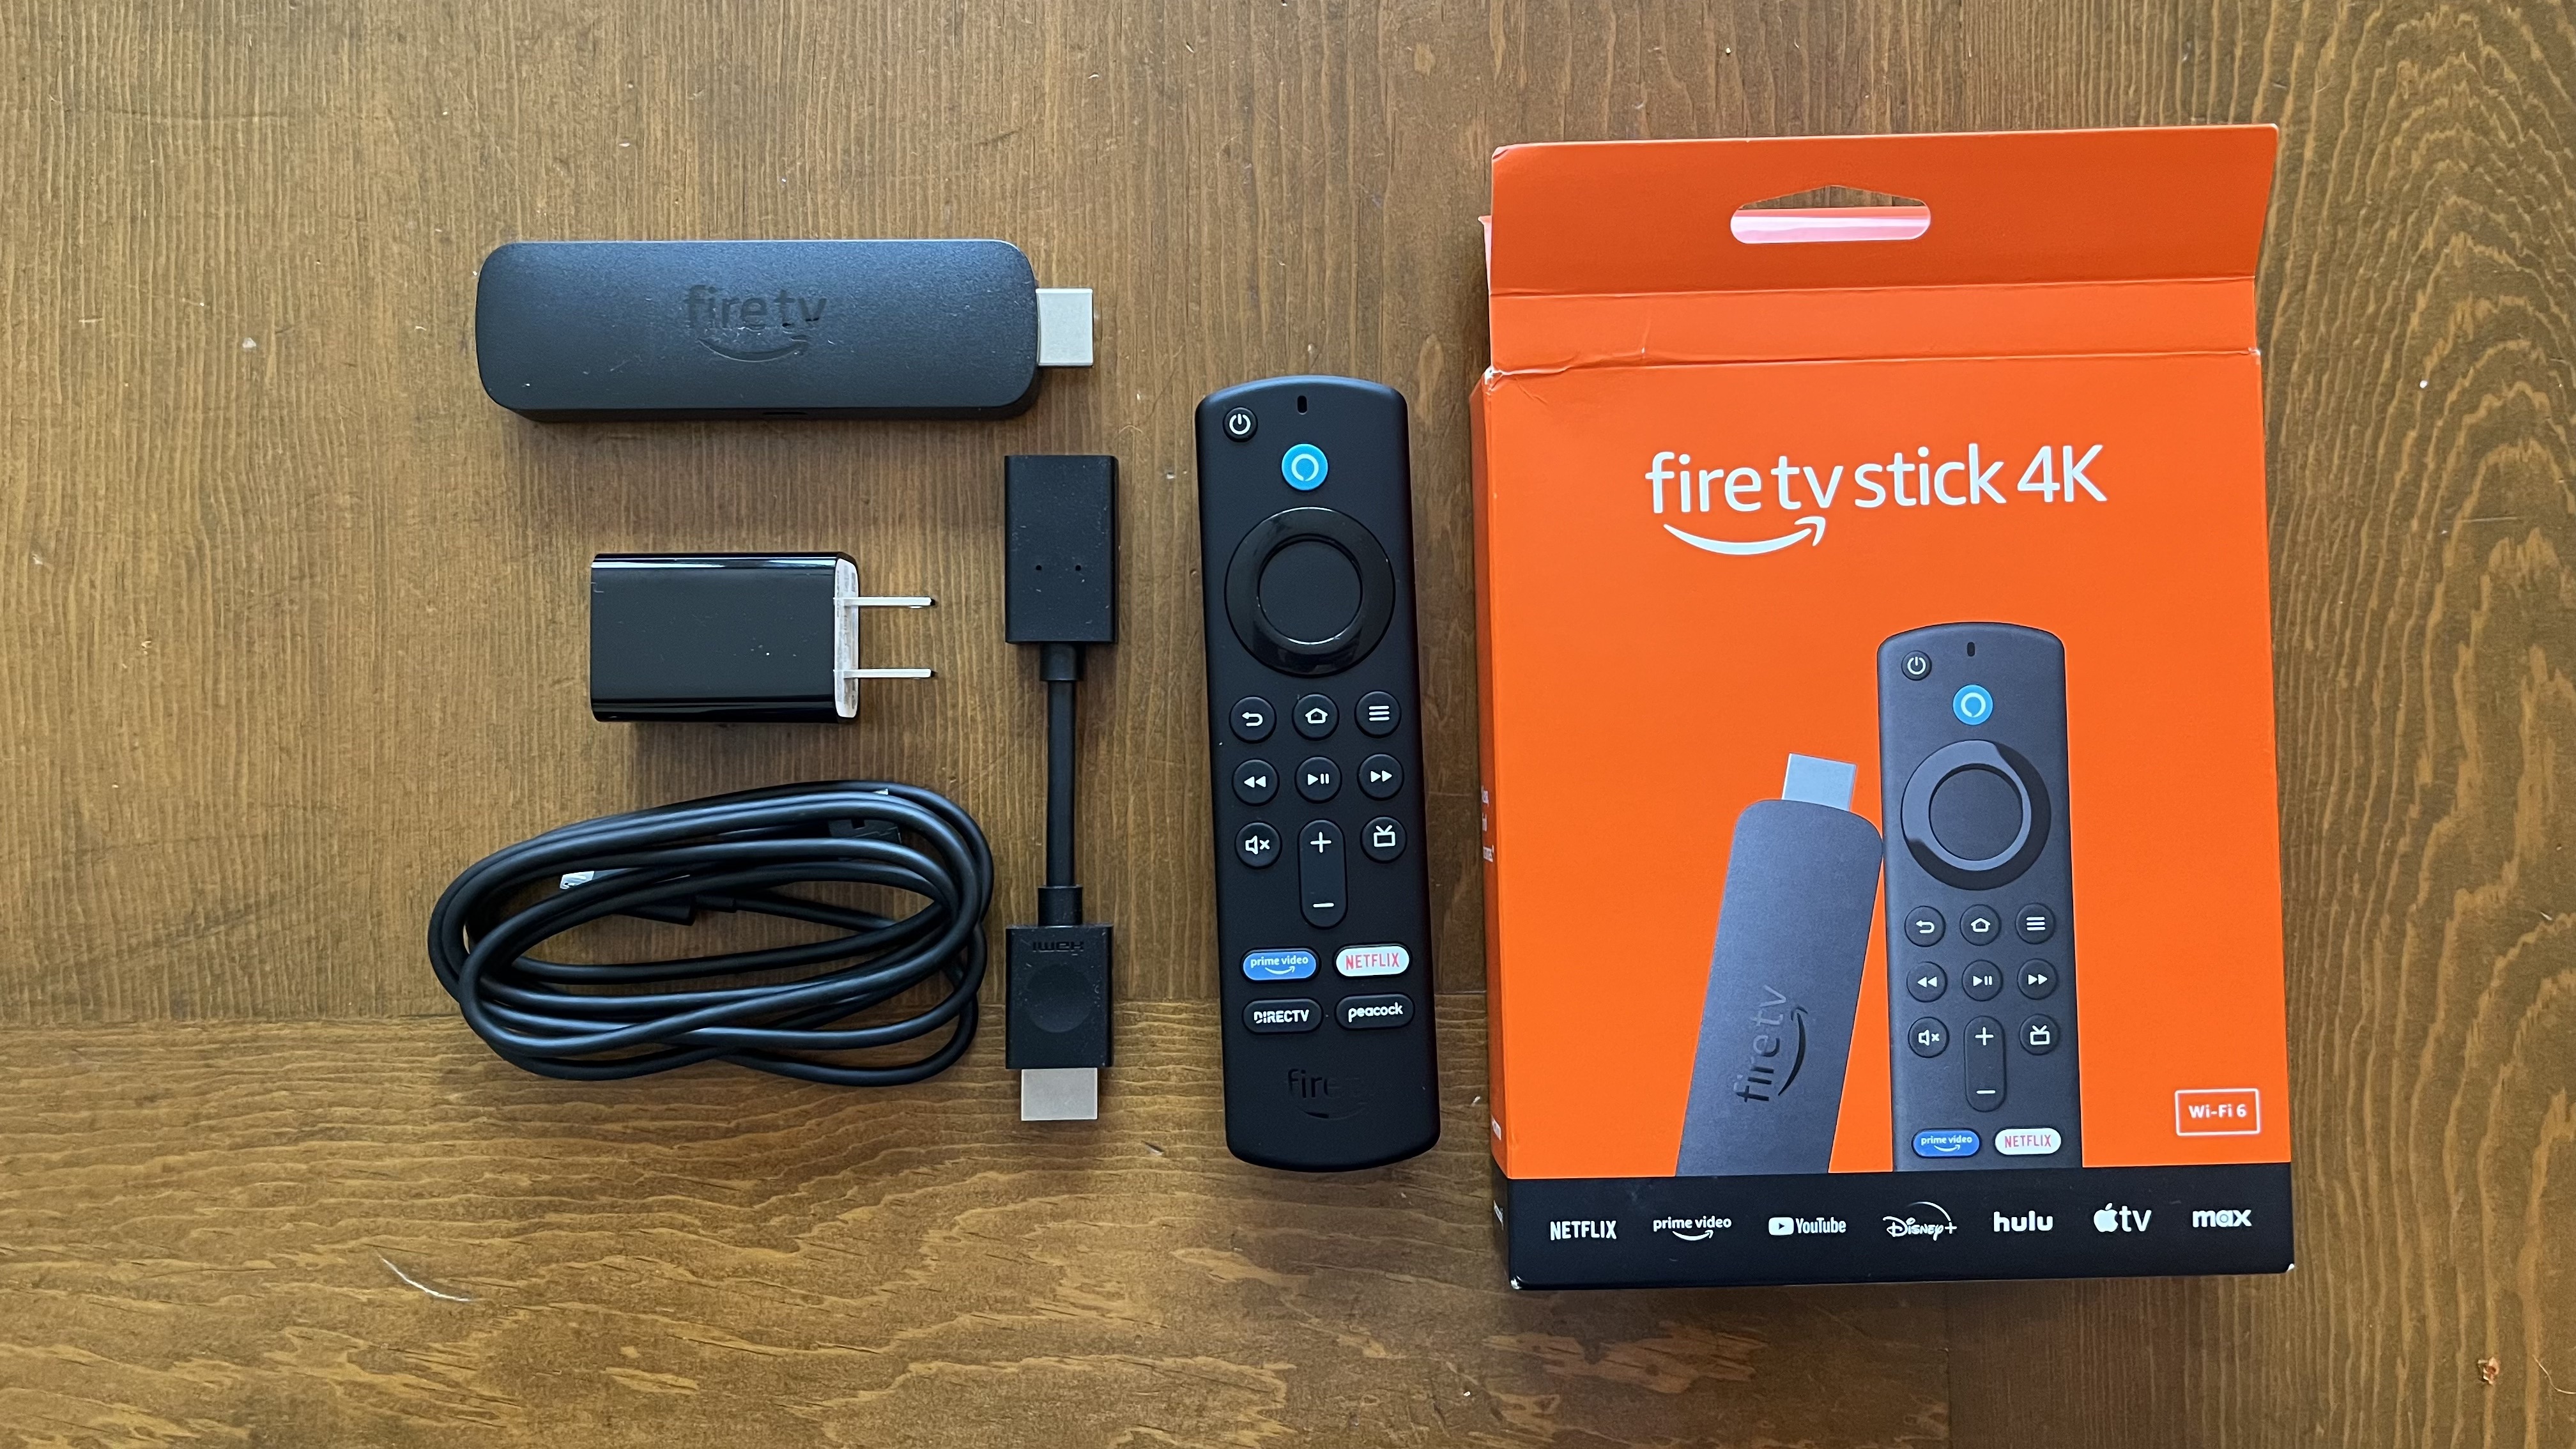 Amazon Fire TV Stick 4K (2023) accessories and packing box on table